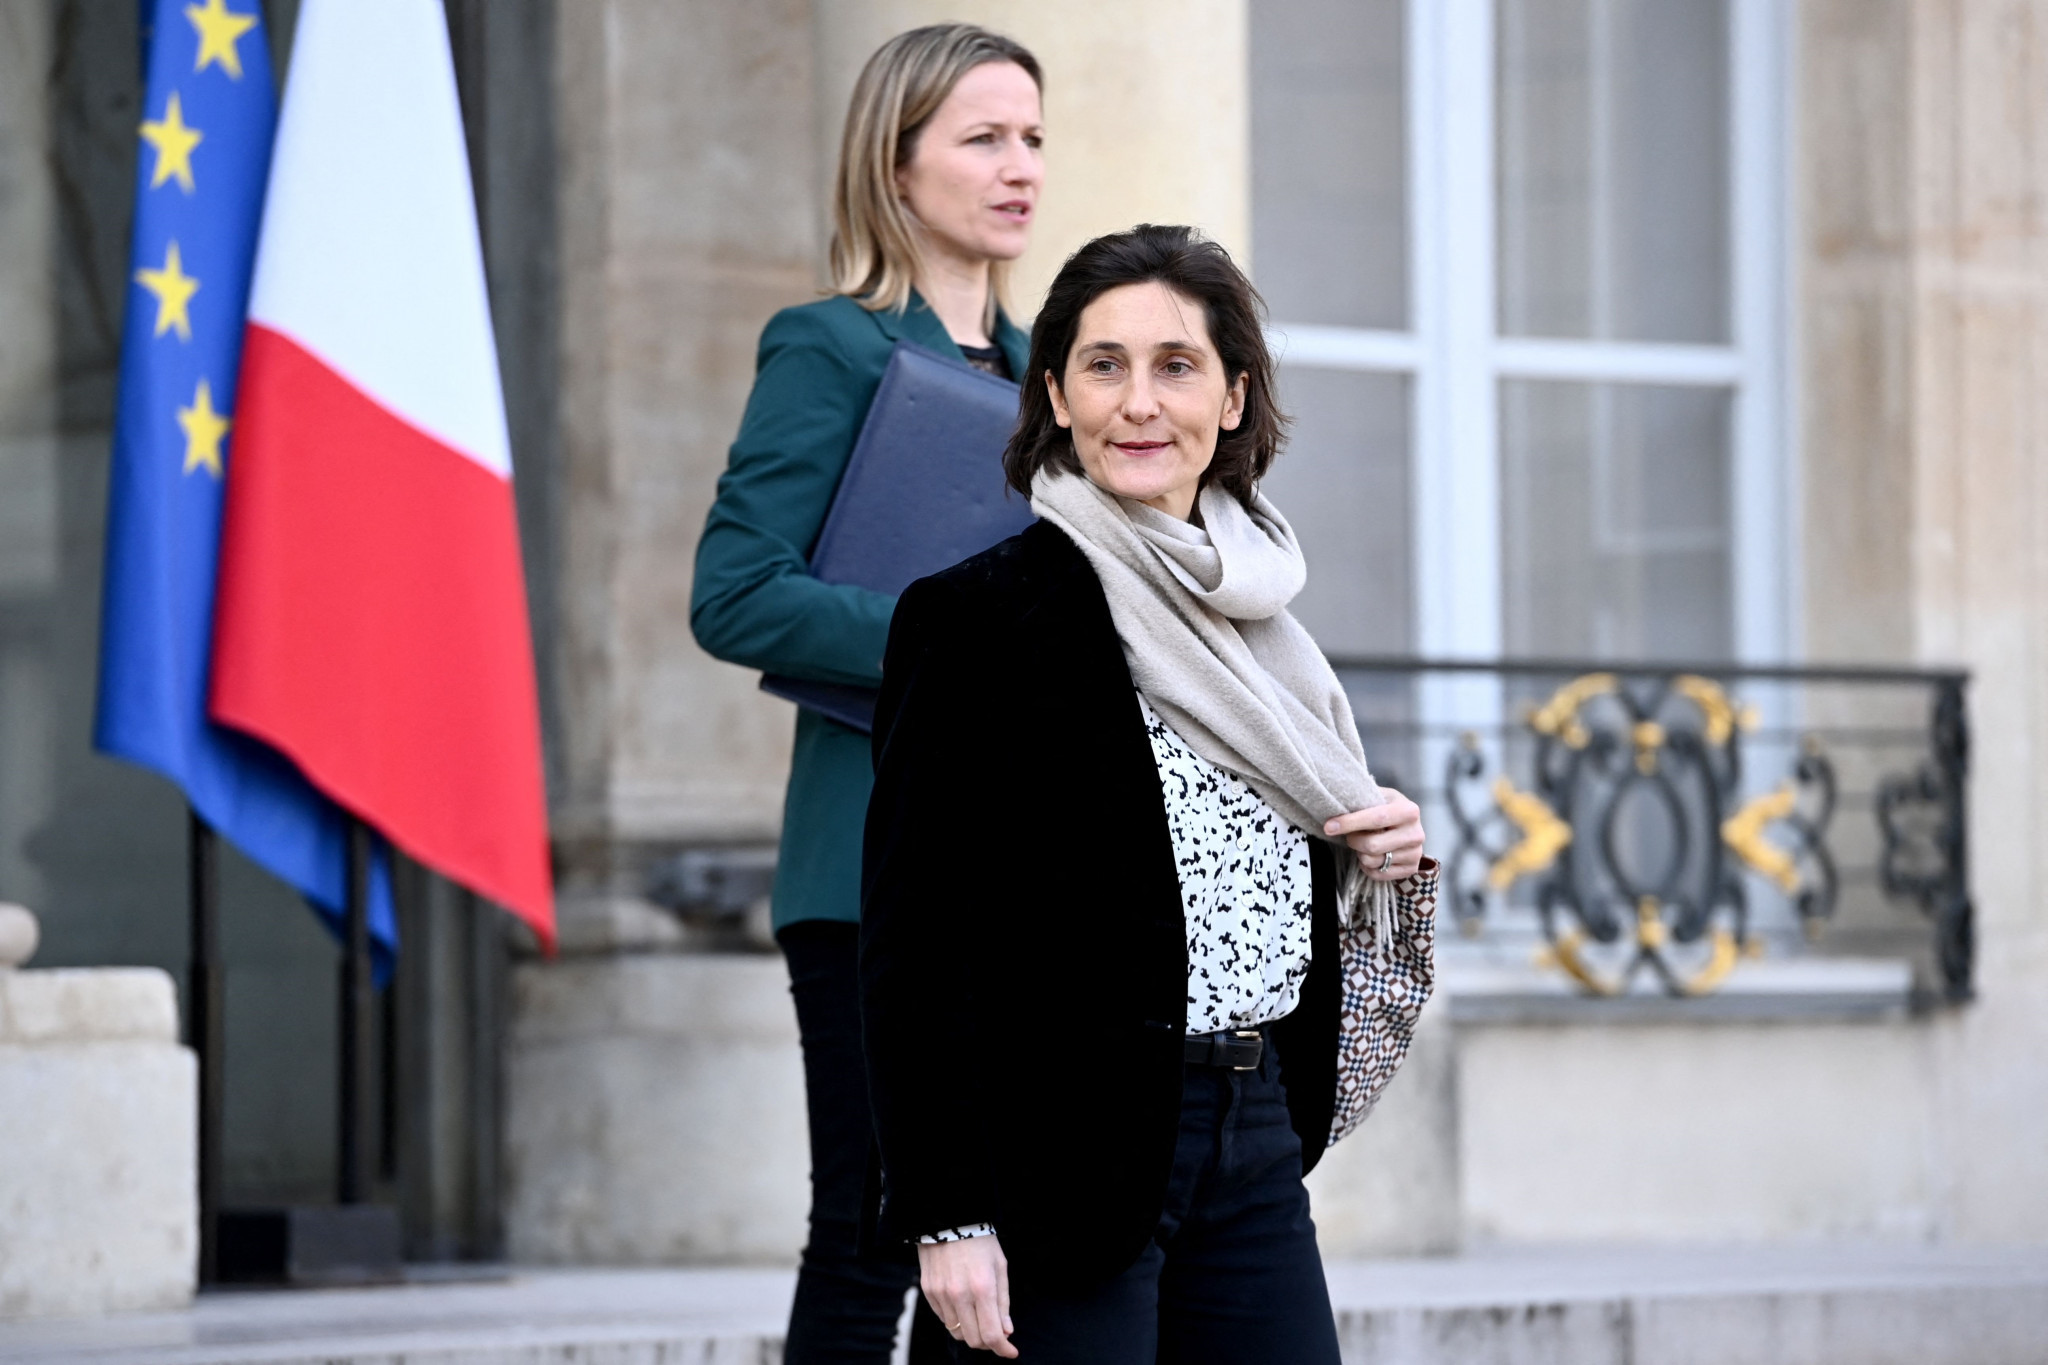 French Sports Minister Amélie Oudéa-Castéra has announced that a national committee would be tasked with ensuring governance in sports is "more ethical, more democratic and more protective of practitioners" ©Getty Images